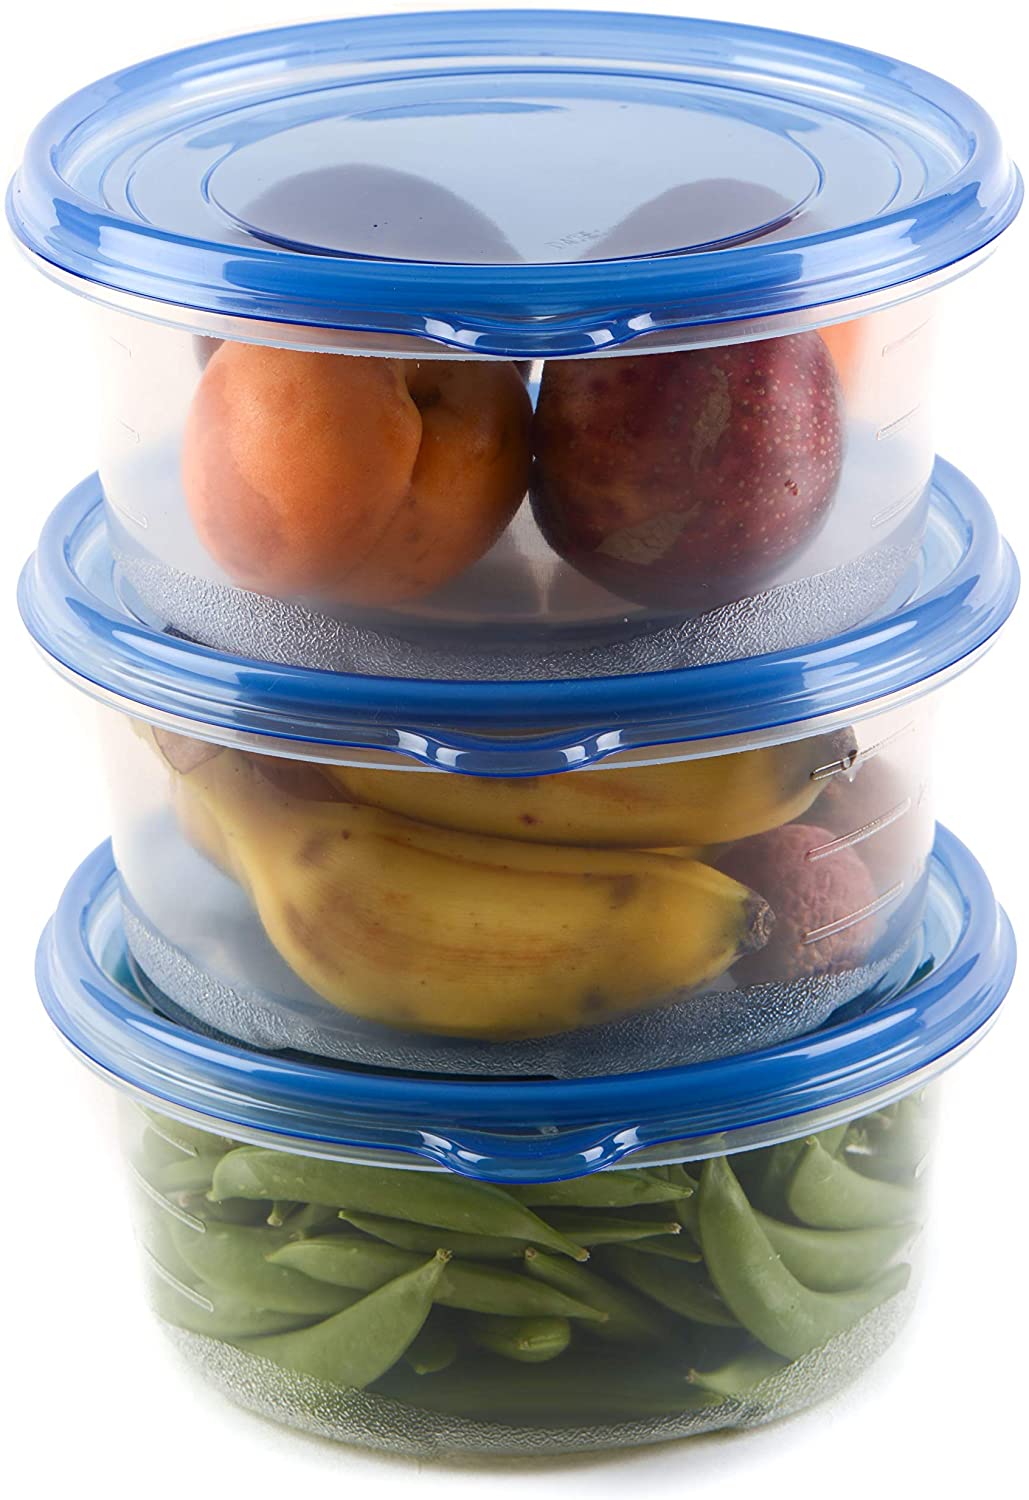 [54 Pack] 48oz Round Plastic Reusable Storage Containers with Snap on Lids - Airtight Reusable Plastic Food Storage, Leak-Proof, Meal Prep, Lunch